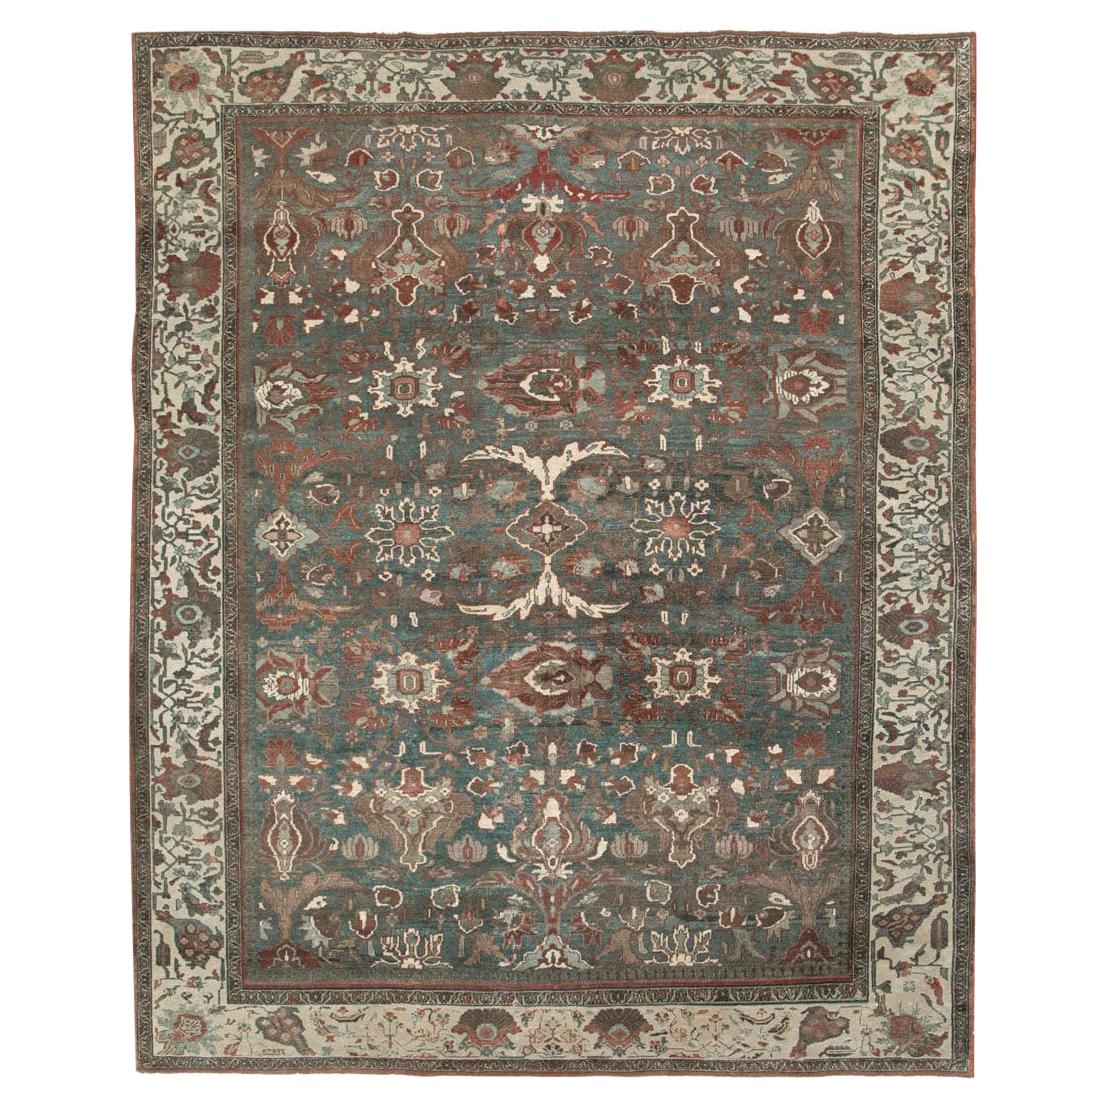 Early 20th Century Handmade Persian Malayer Room Size Carpet For Sale